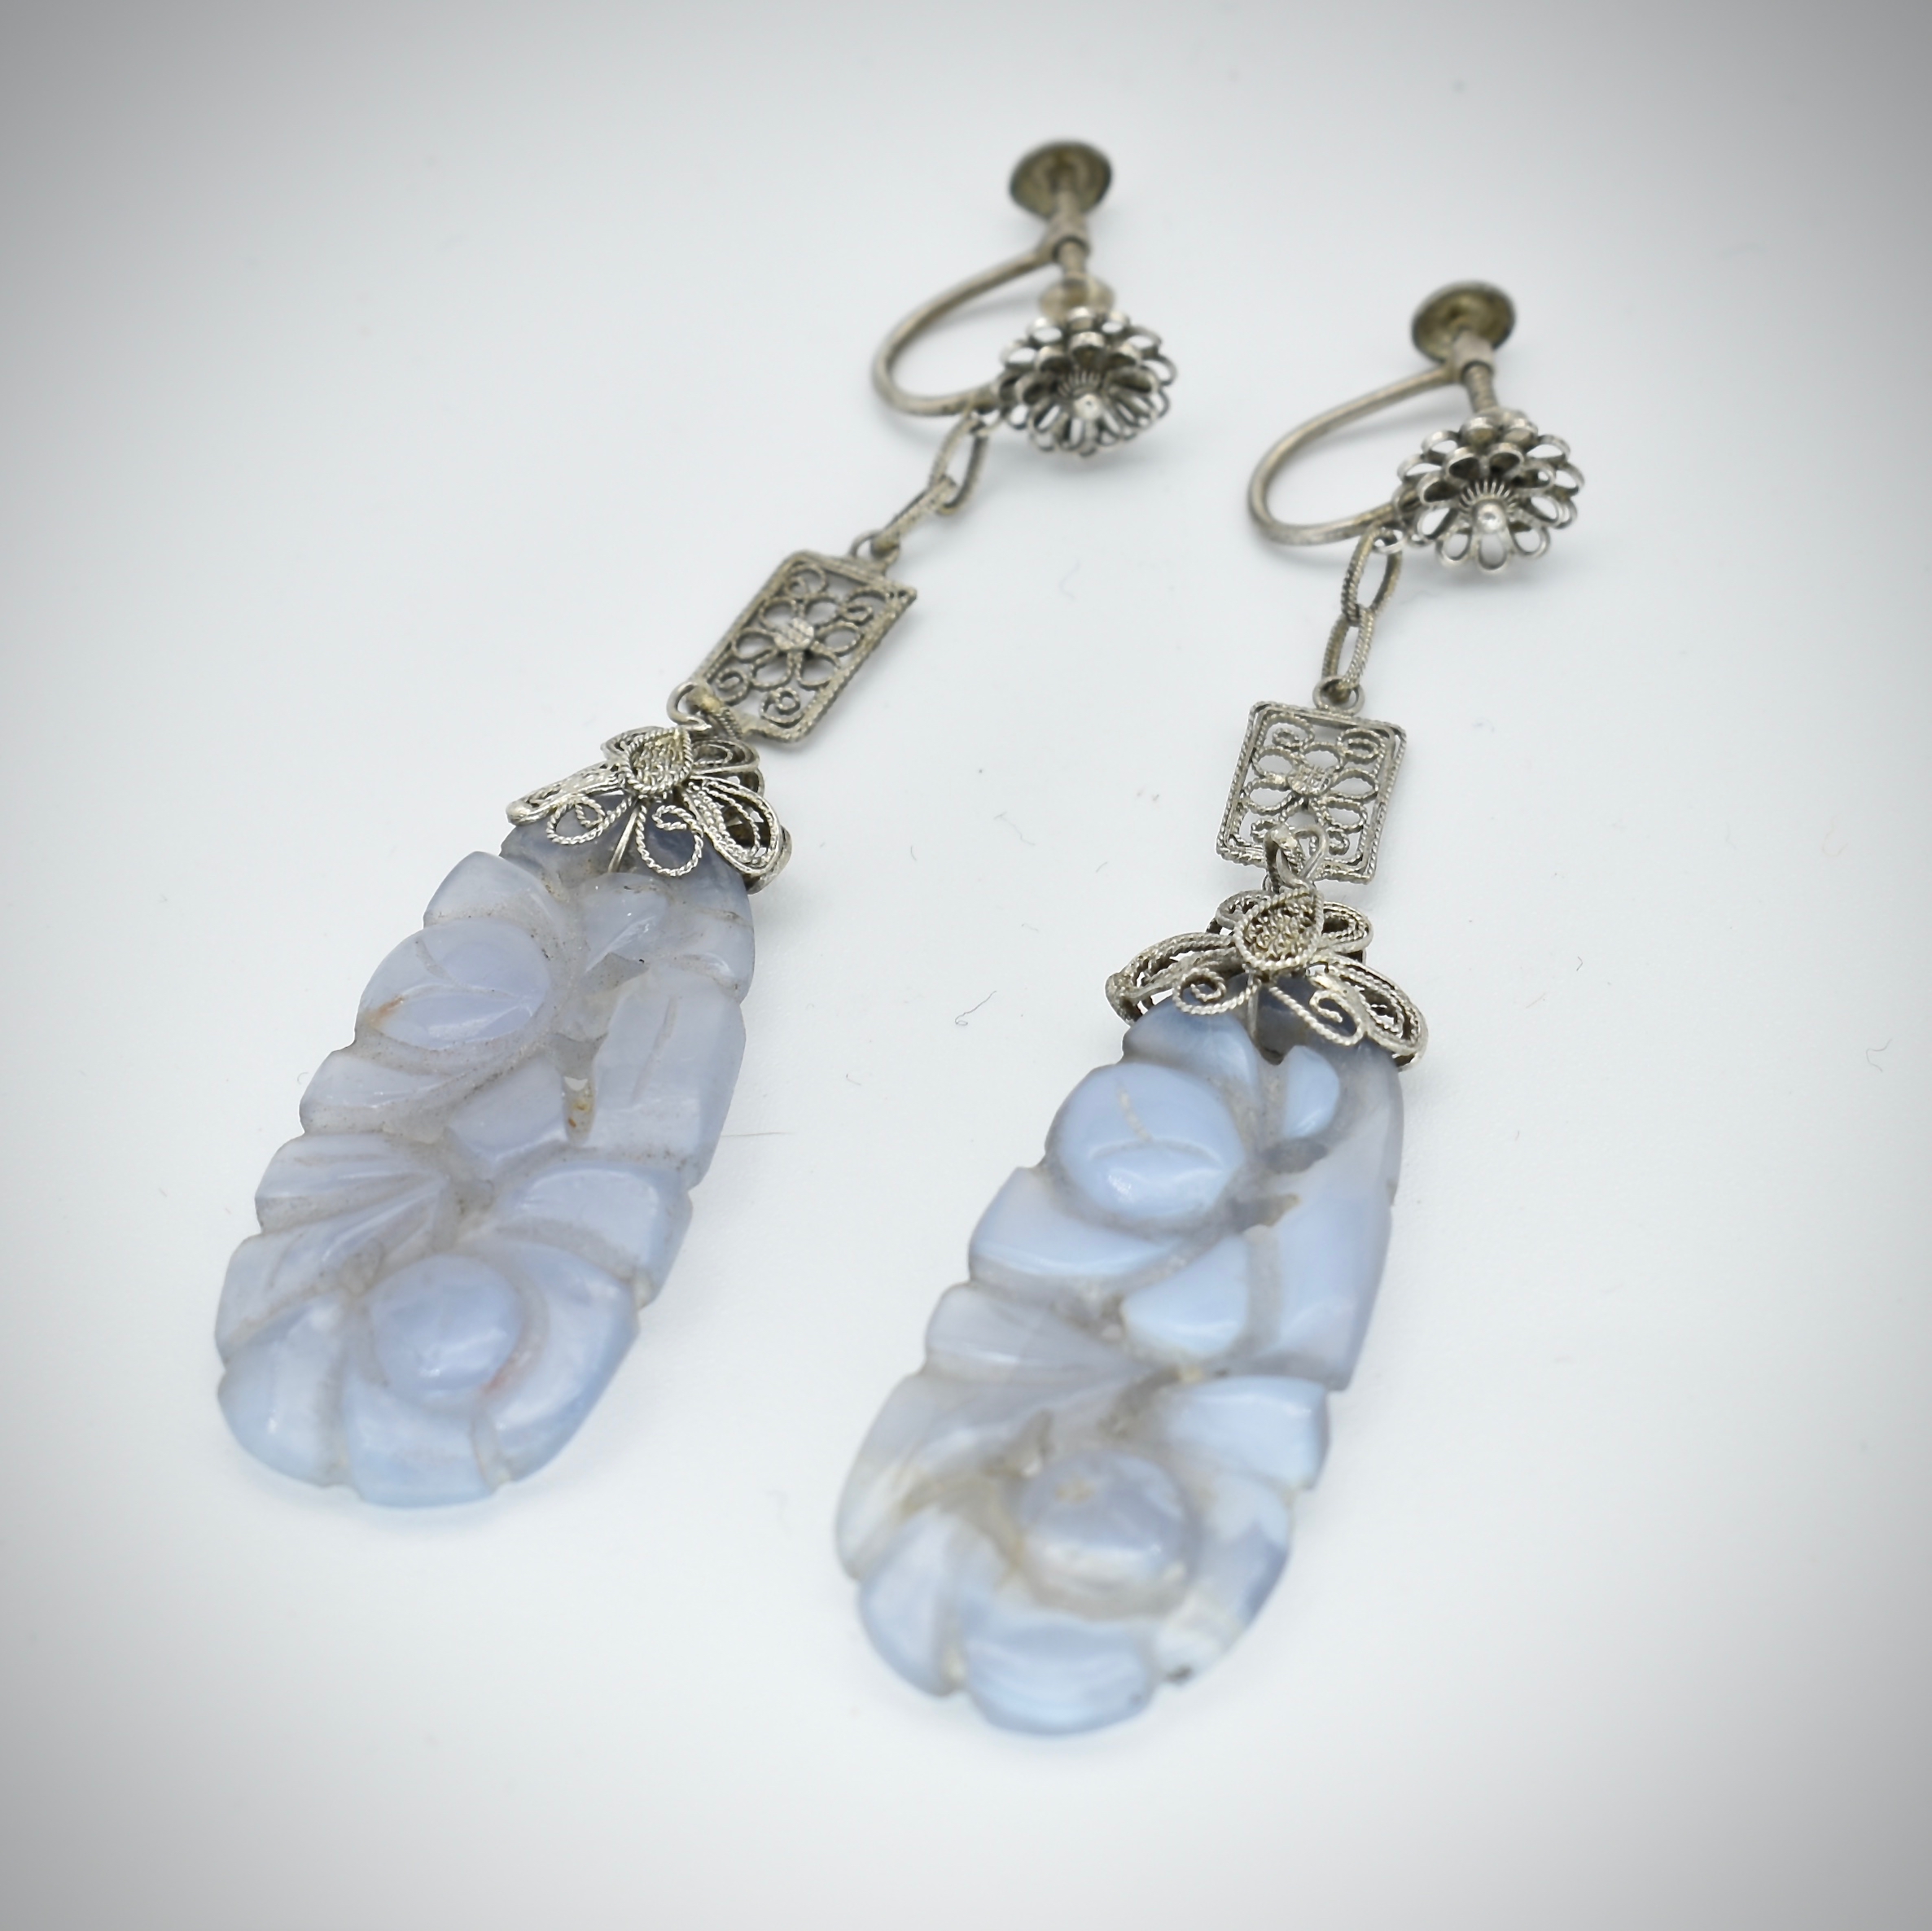 Pair of Chinese Carved Agate Pendant Earrings